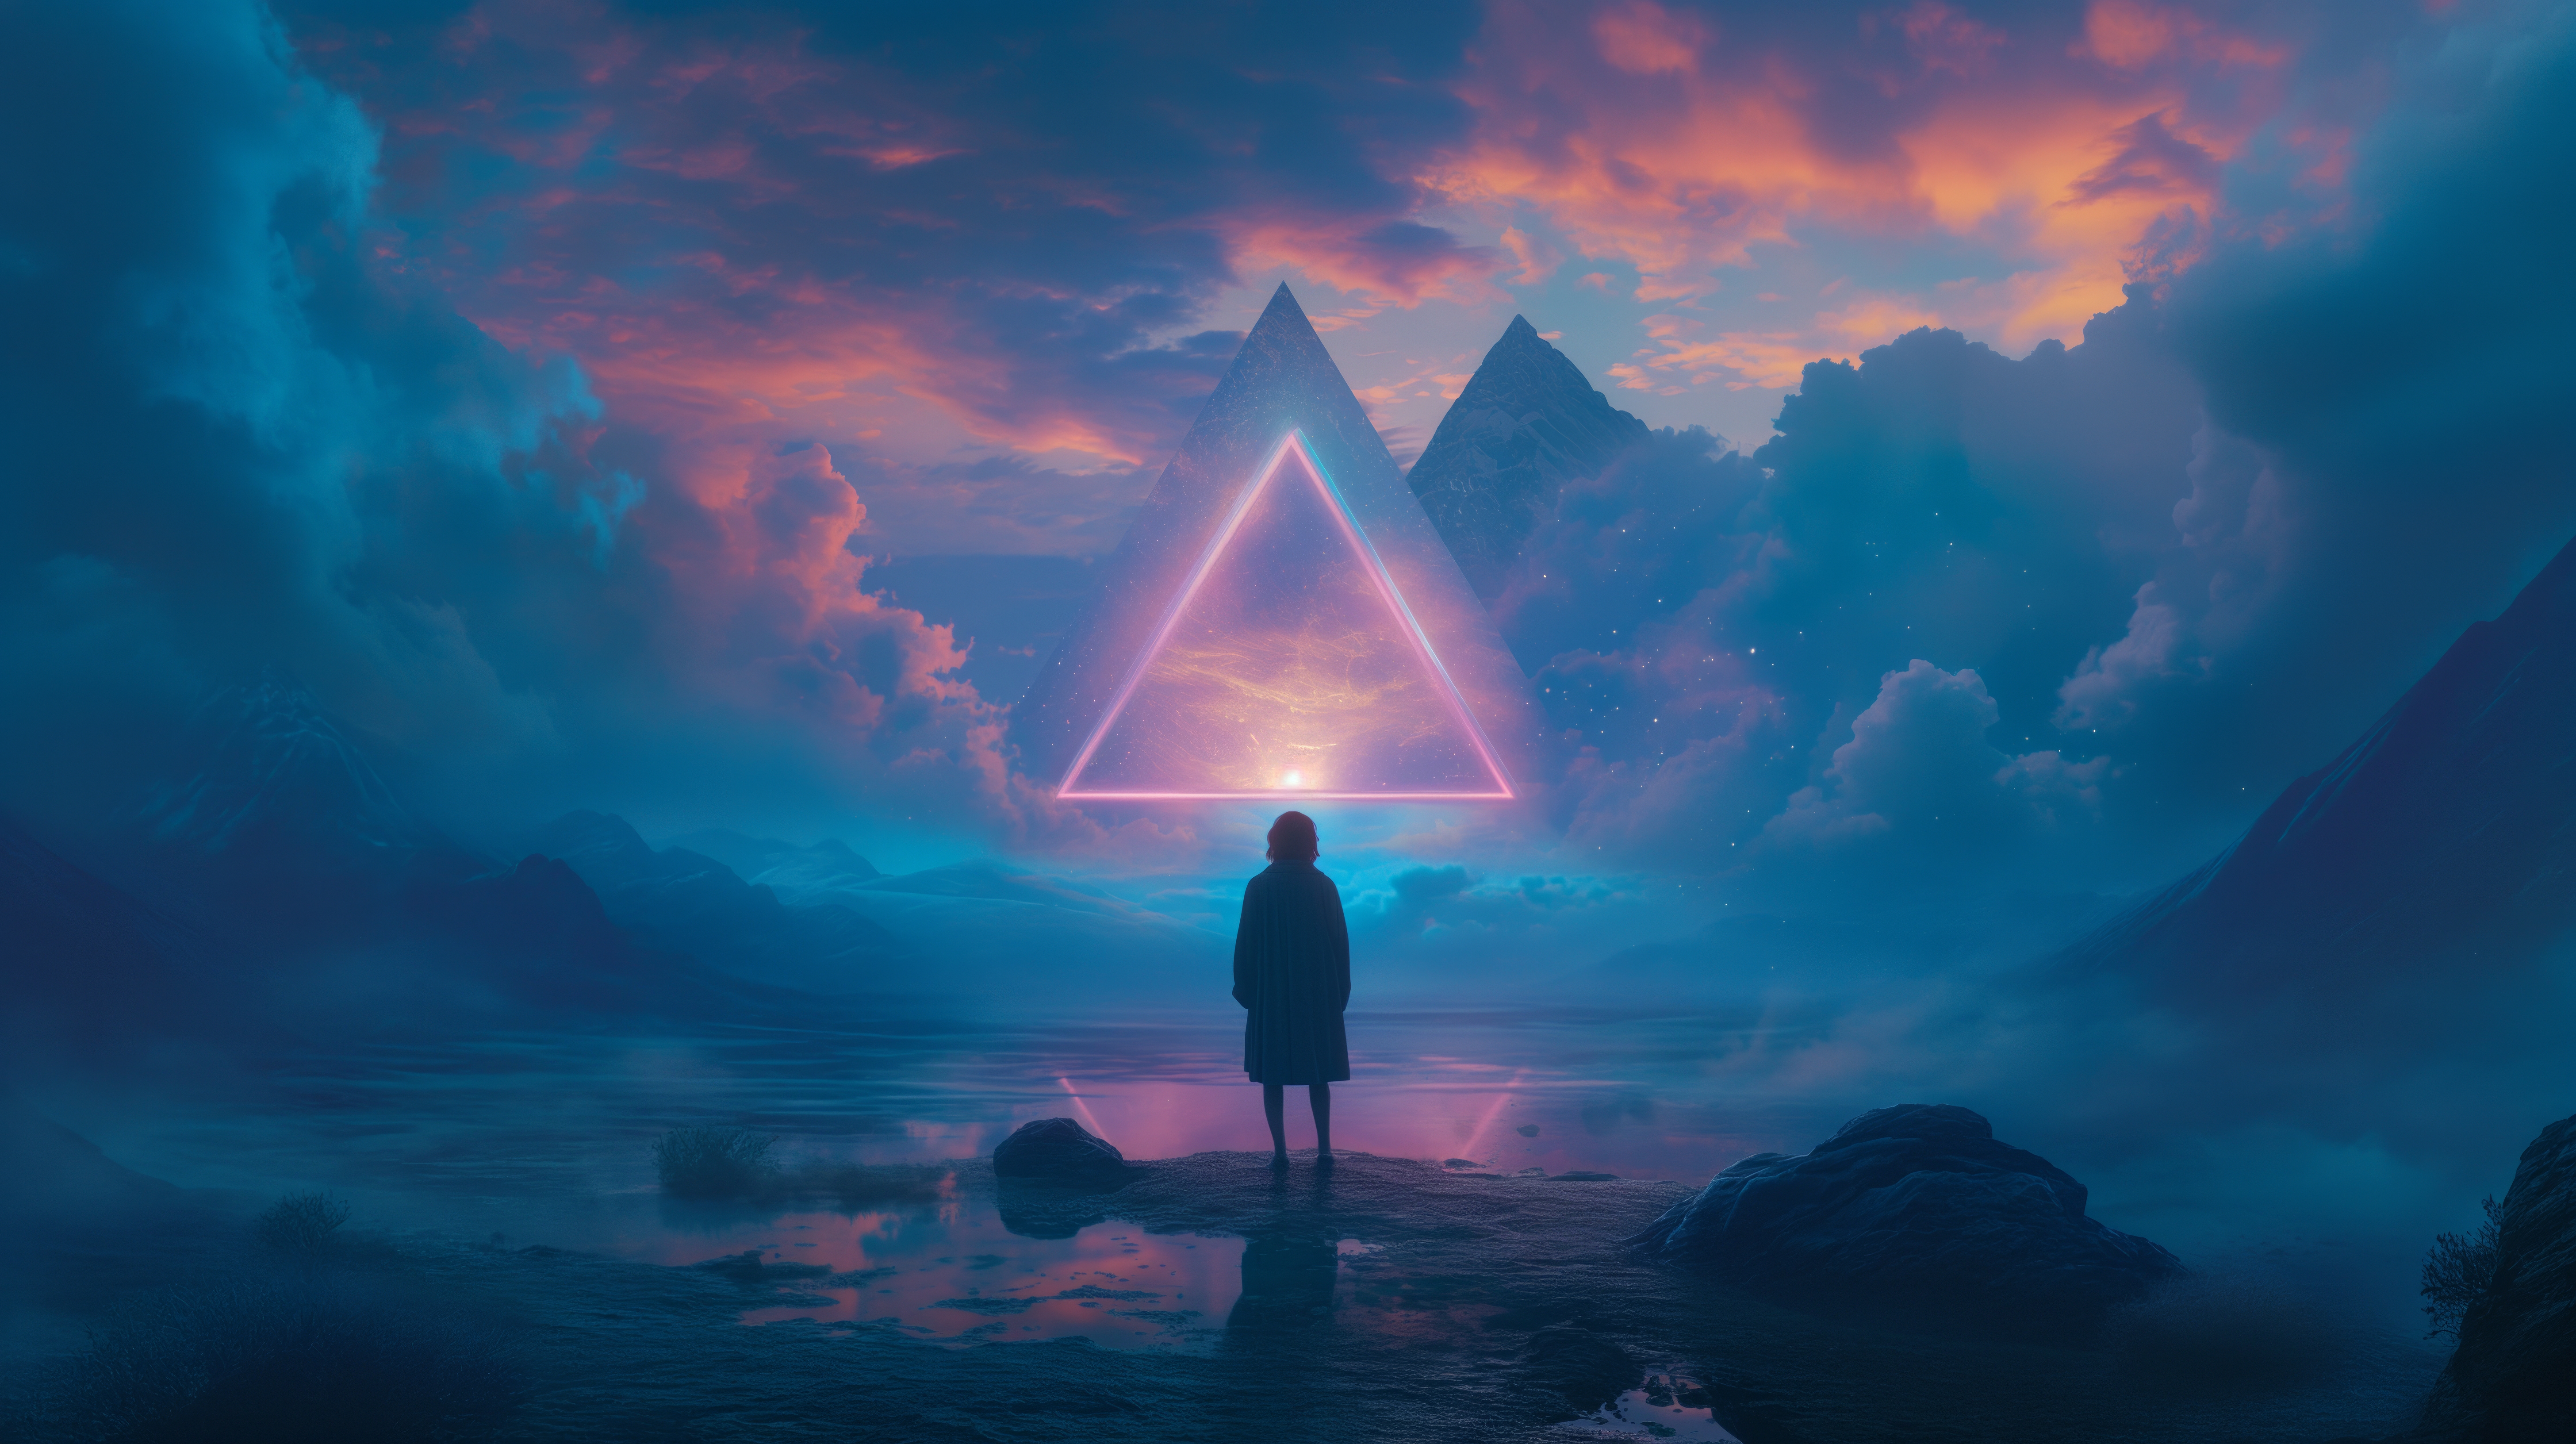 Neon Synthwave Triangle Clouds Blue Illustration 5824x3264